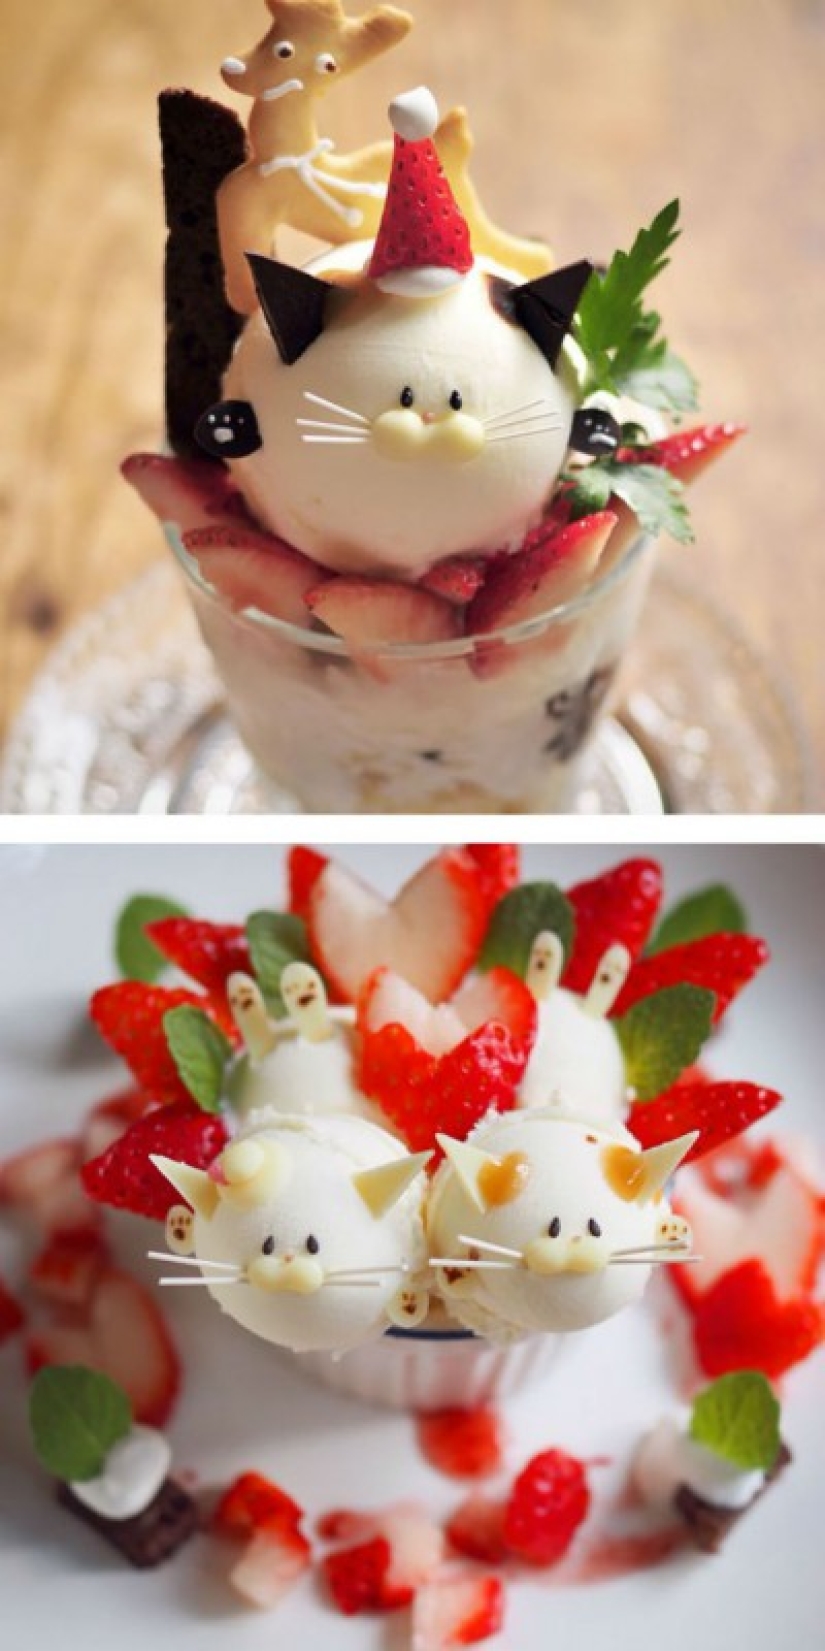 The Japanese make the coolest desserts in the world